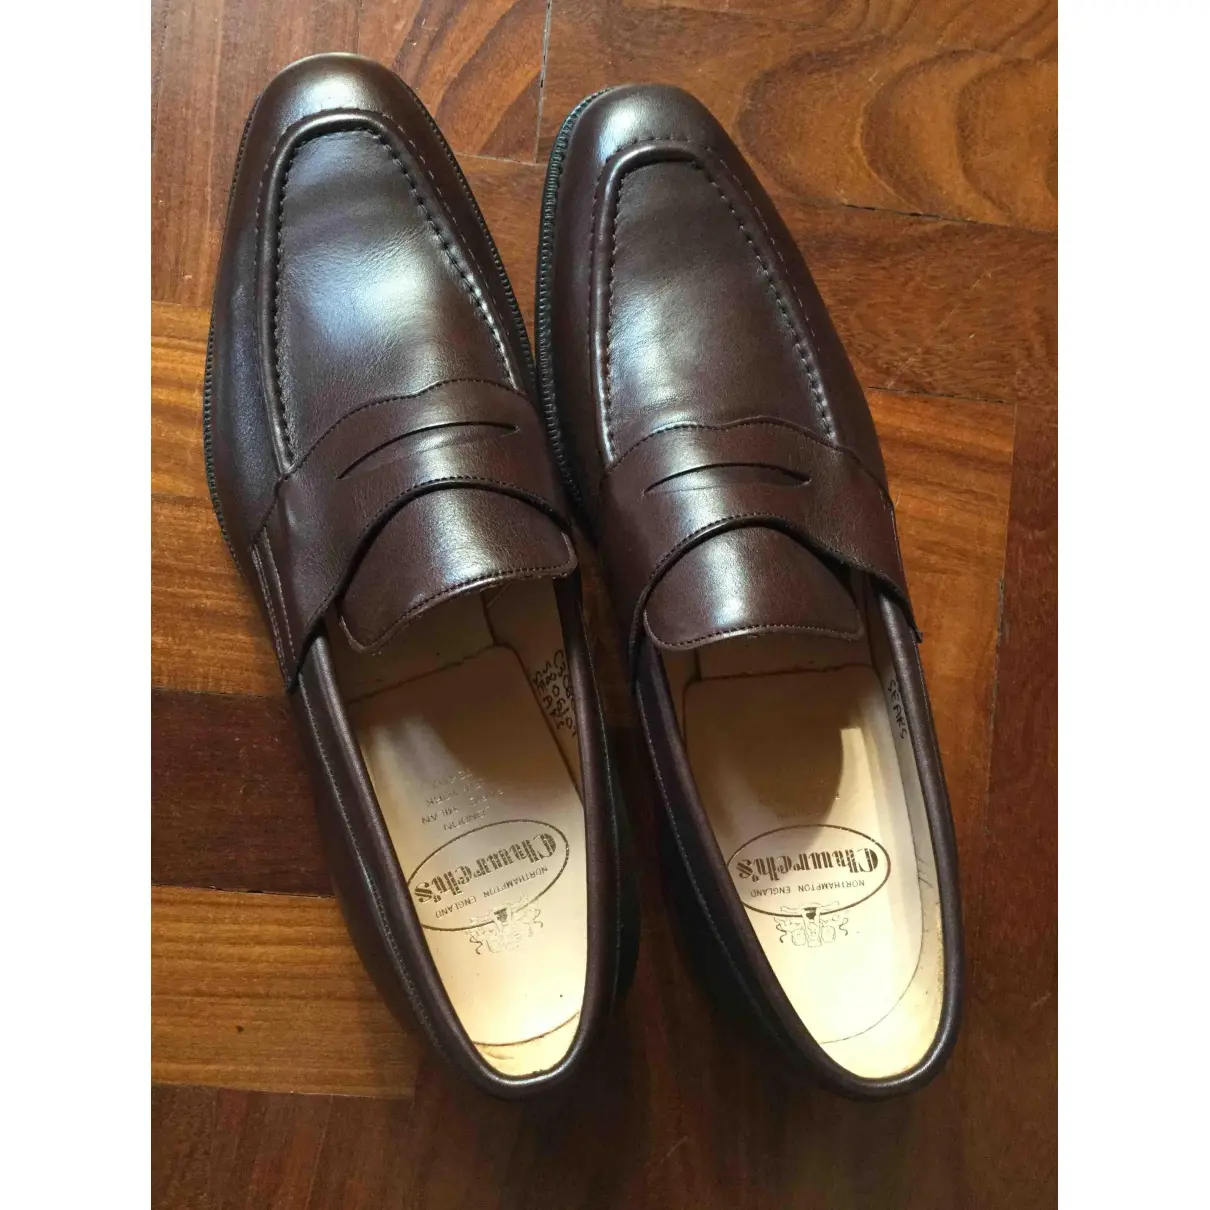 Church's Leather flats for sale